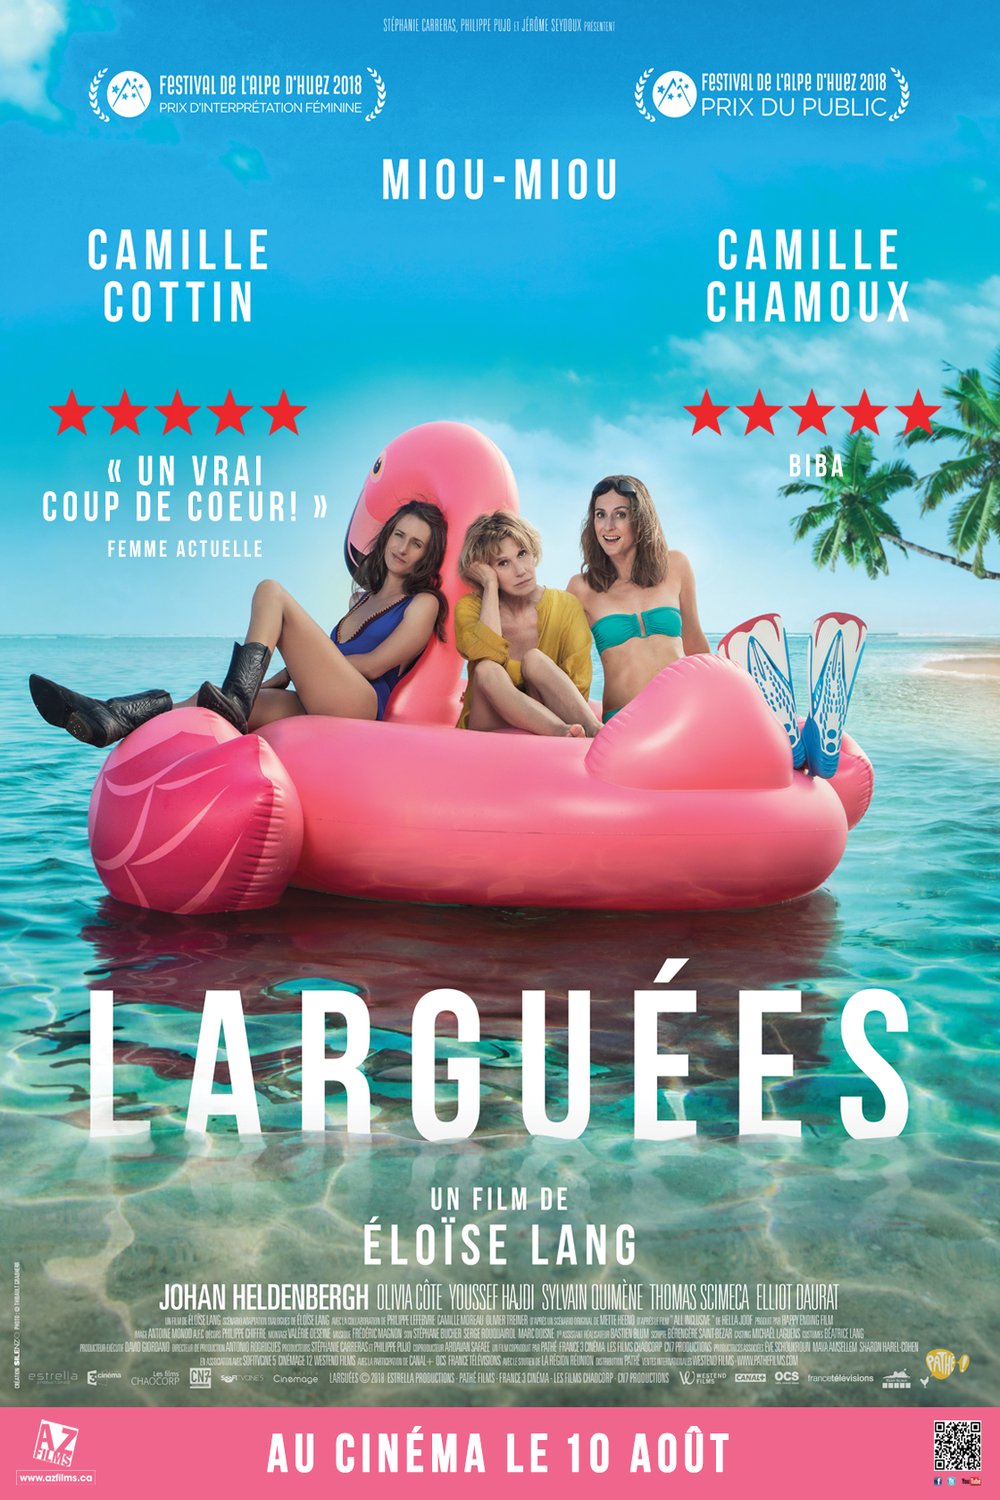 Poster of the movie Larguées